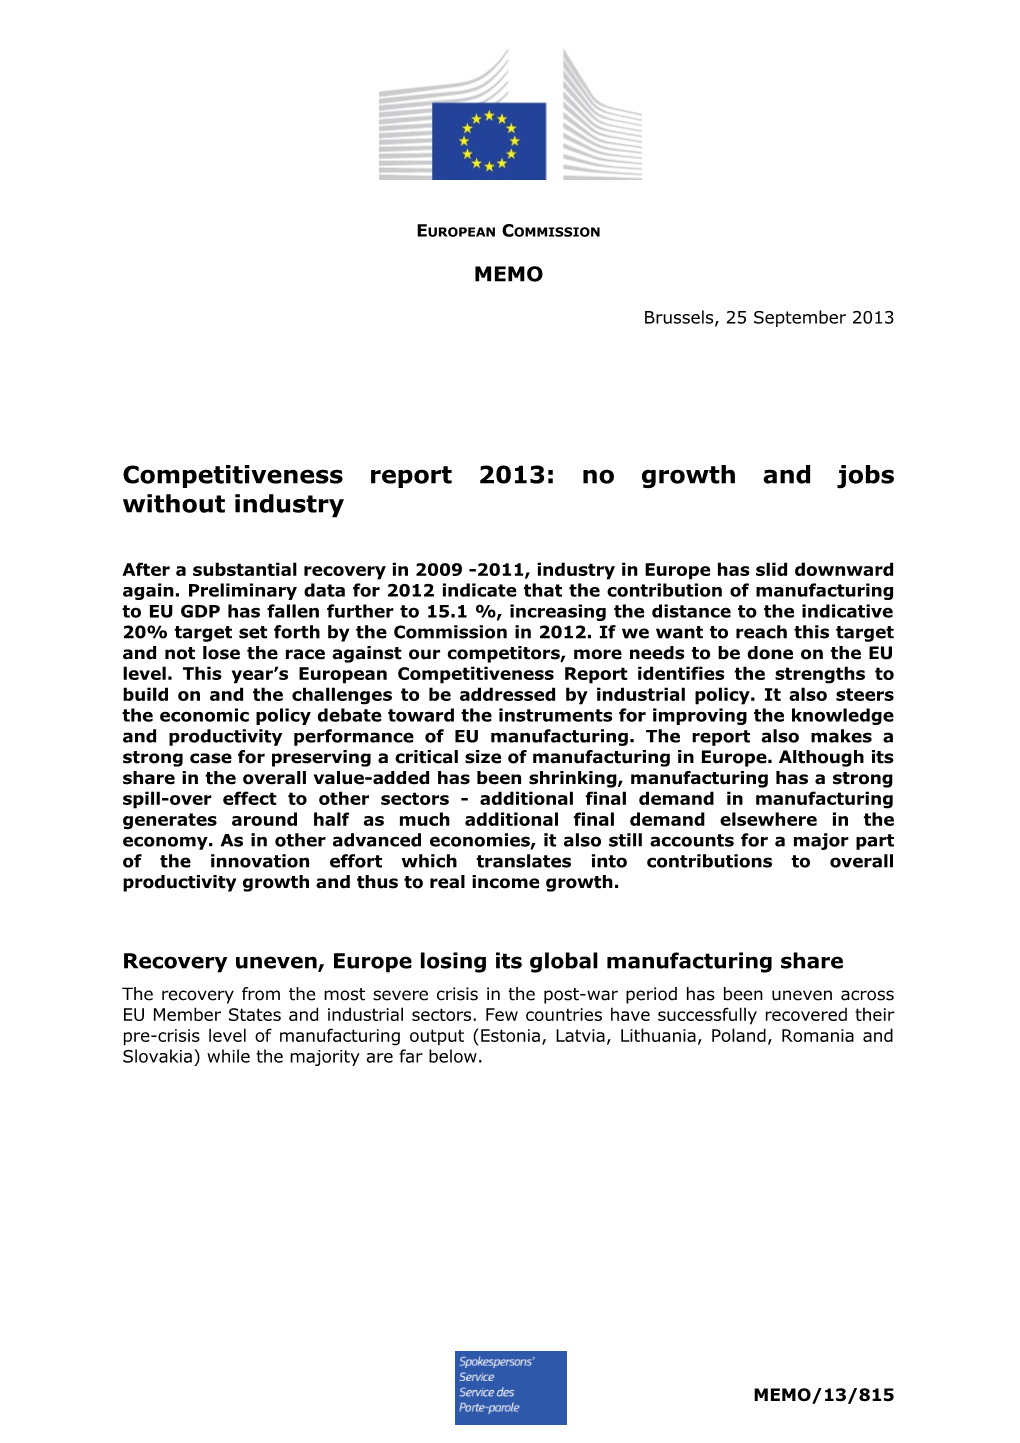 Competitiveness Report 2013: No Growth and Jobs Without Industry